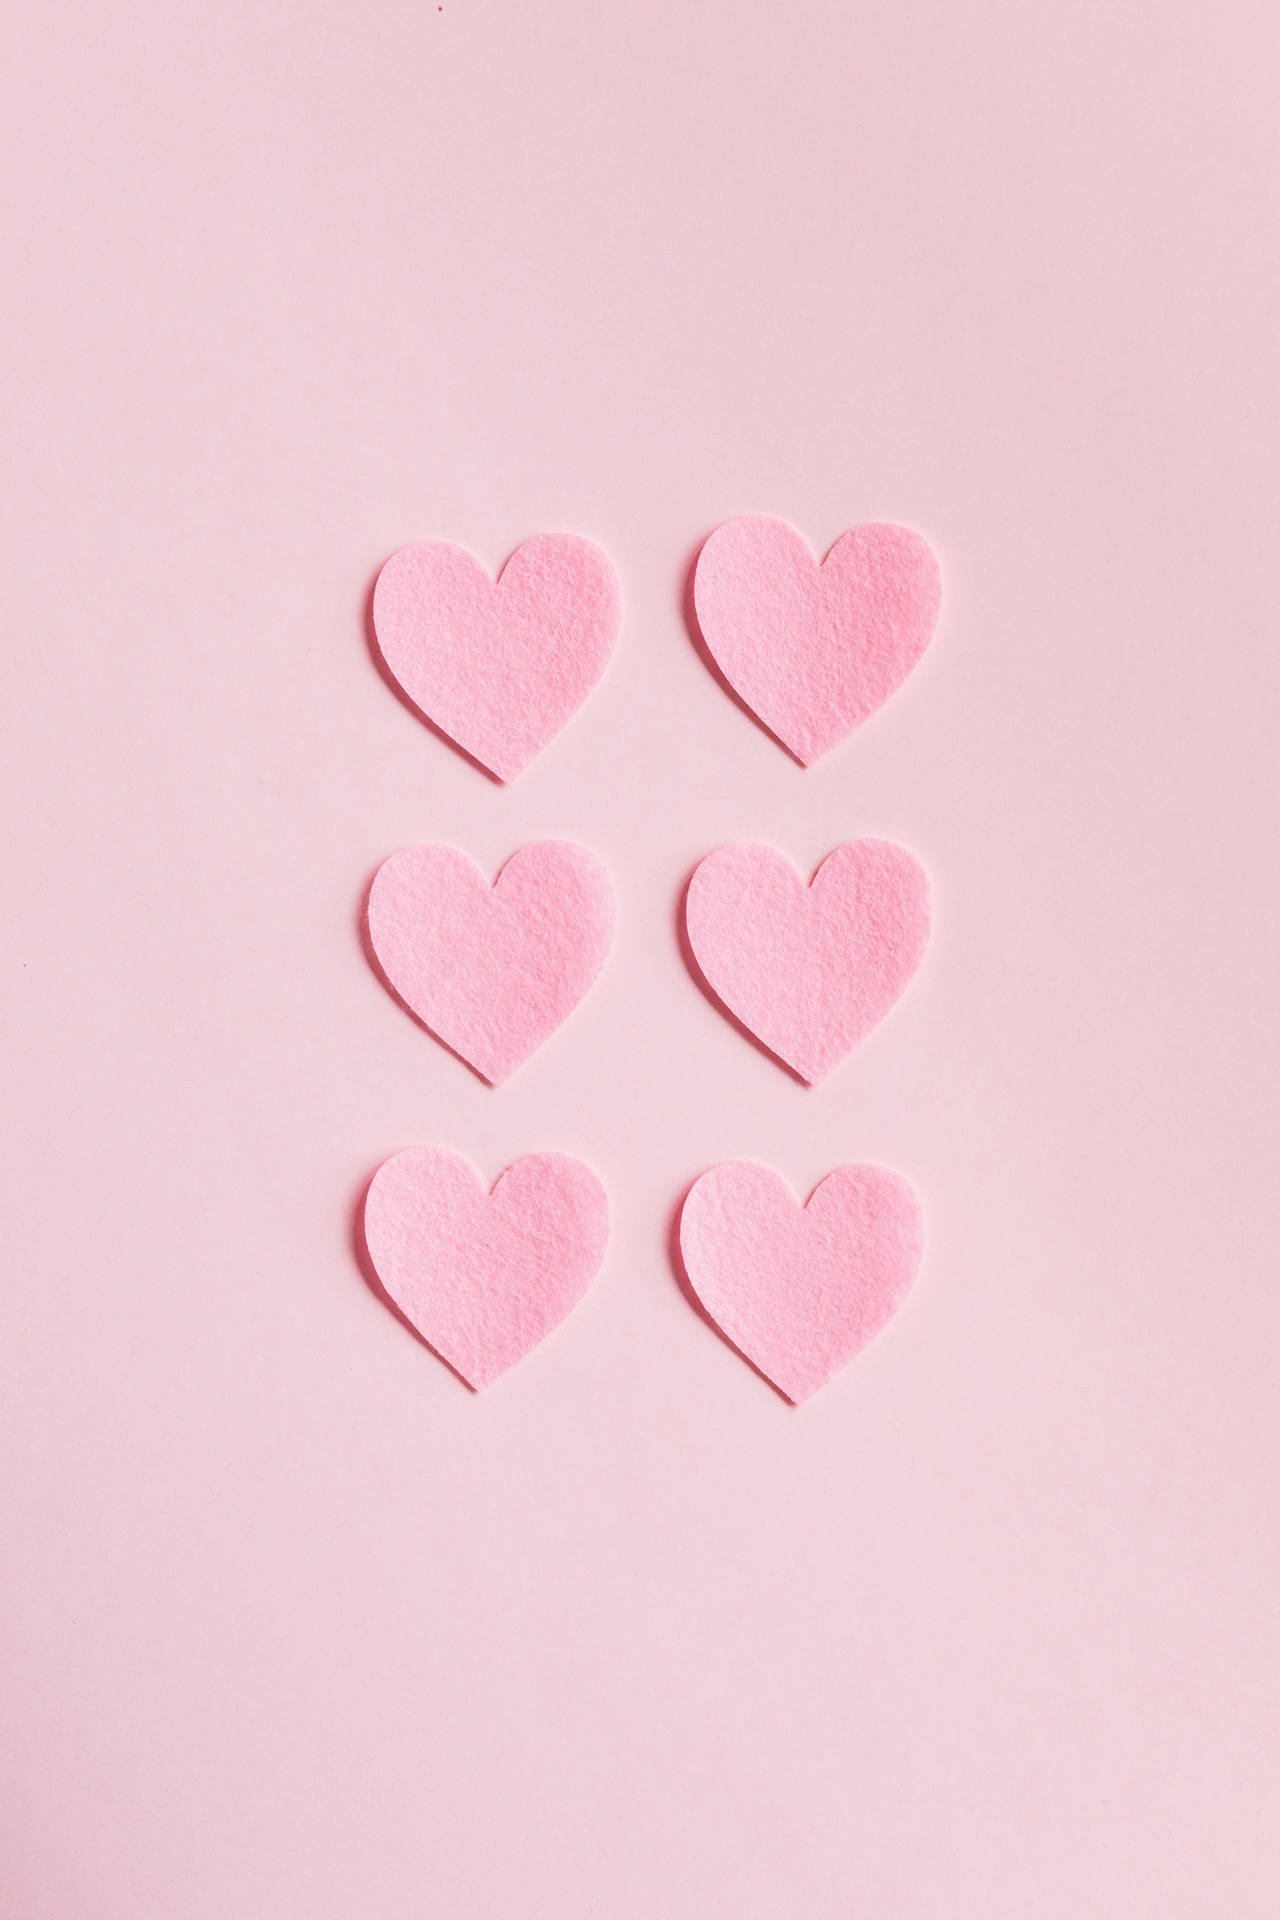 Hearts On Pink Background Background